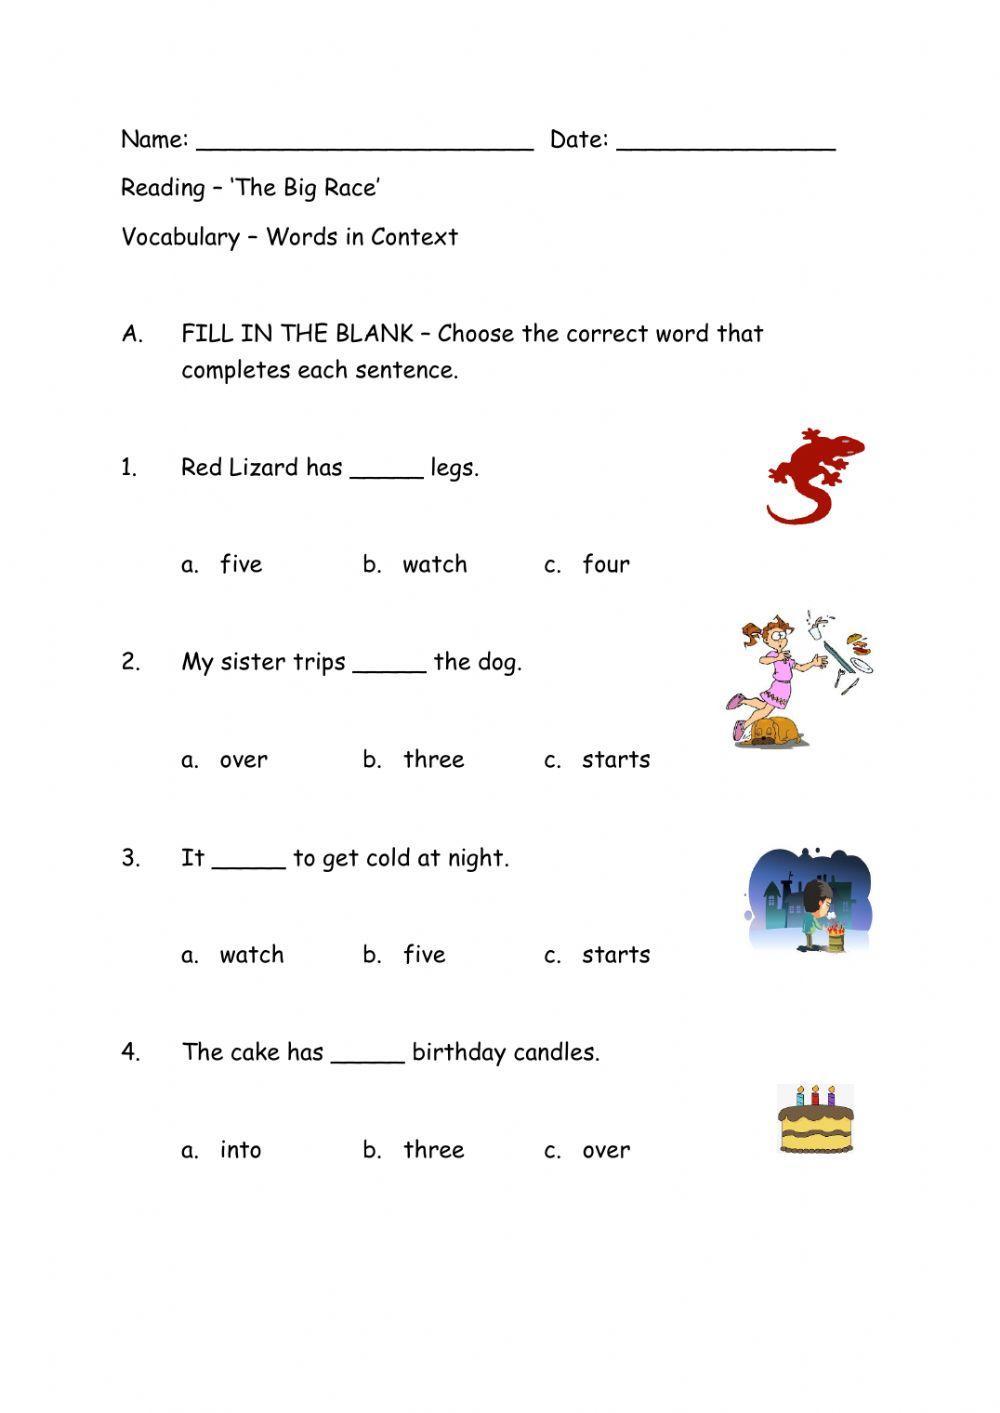 Context Clues-Word Meaning